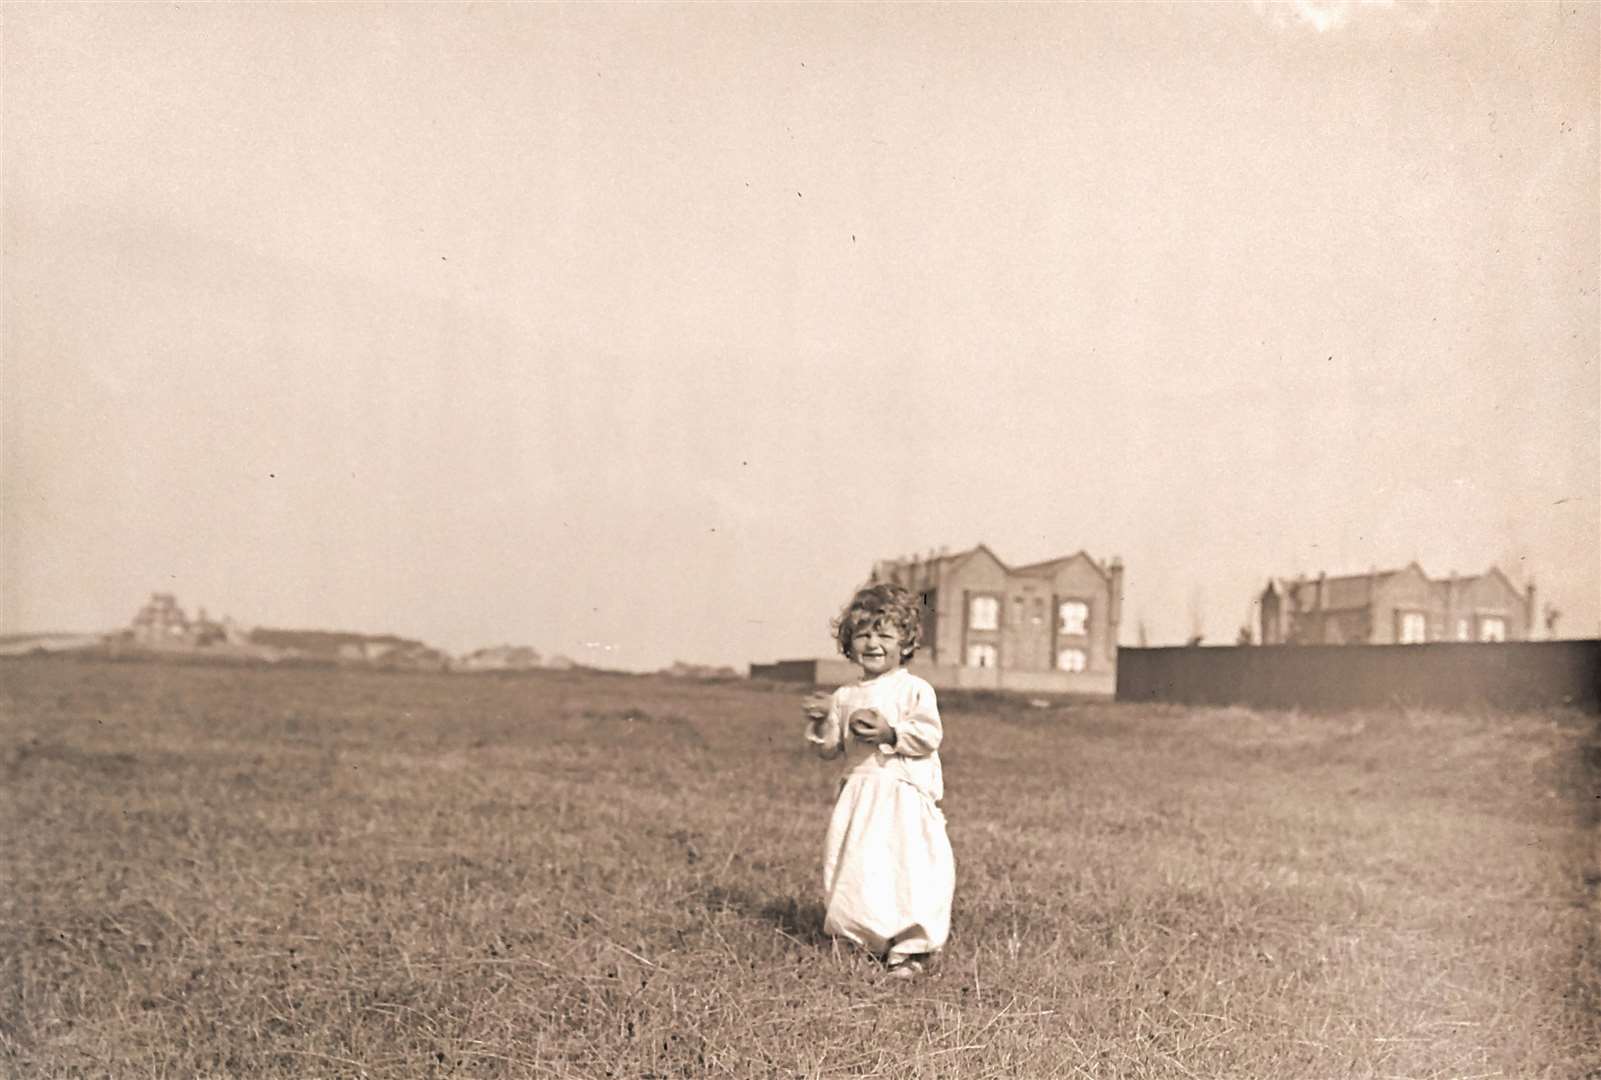 The negatives show images of Tankerton in the early 1900s